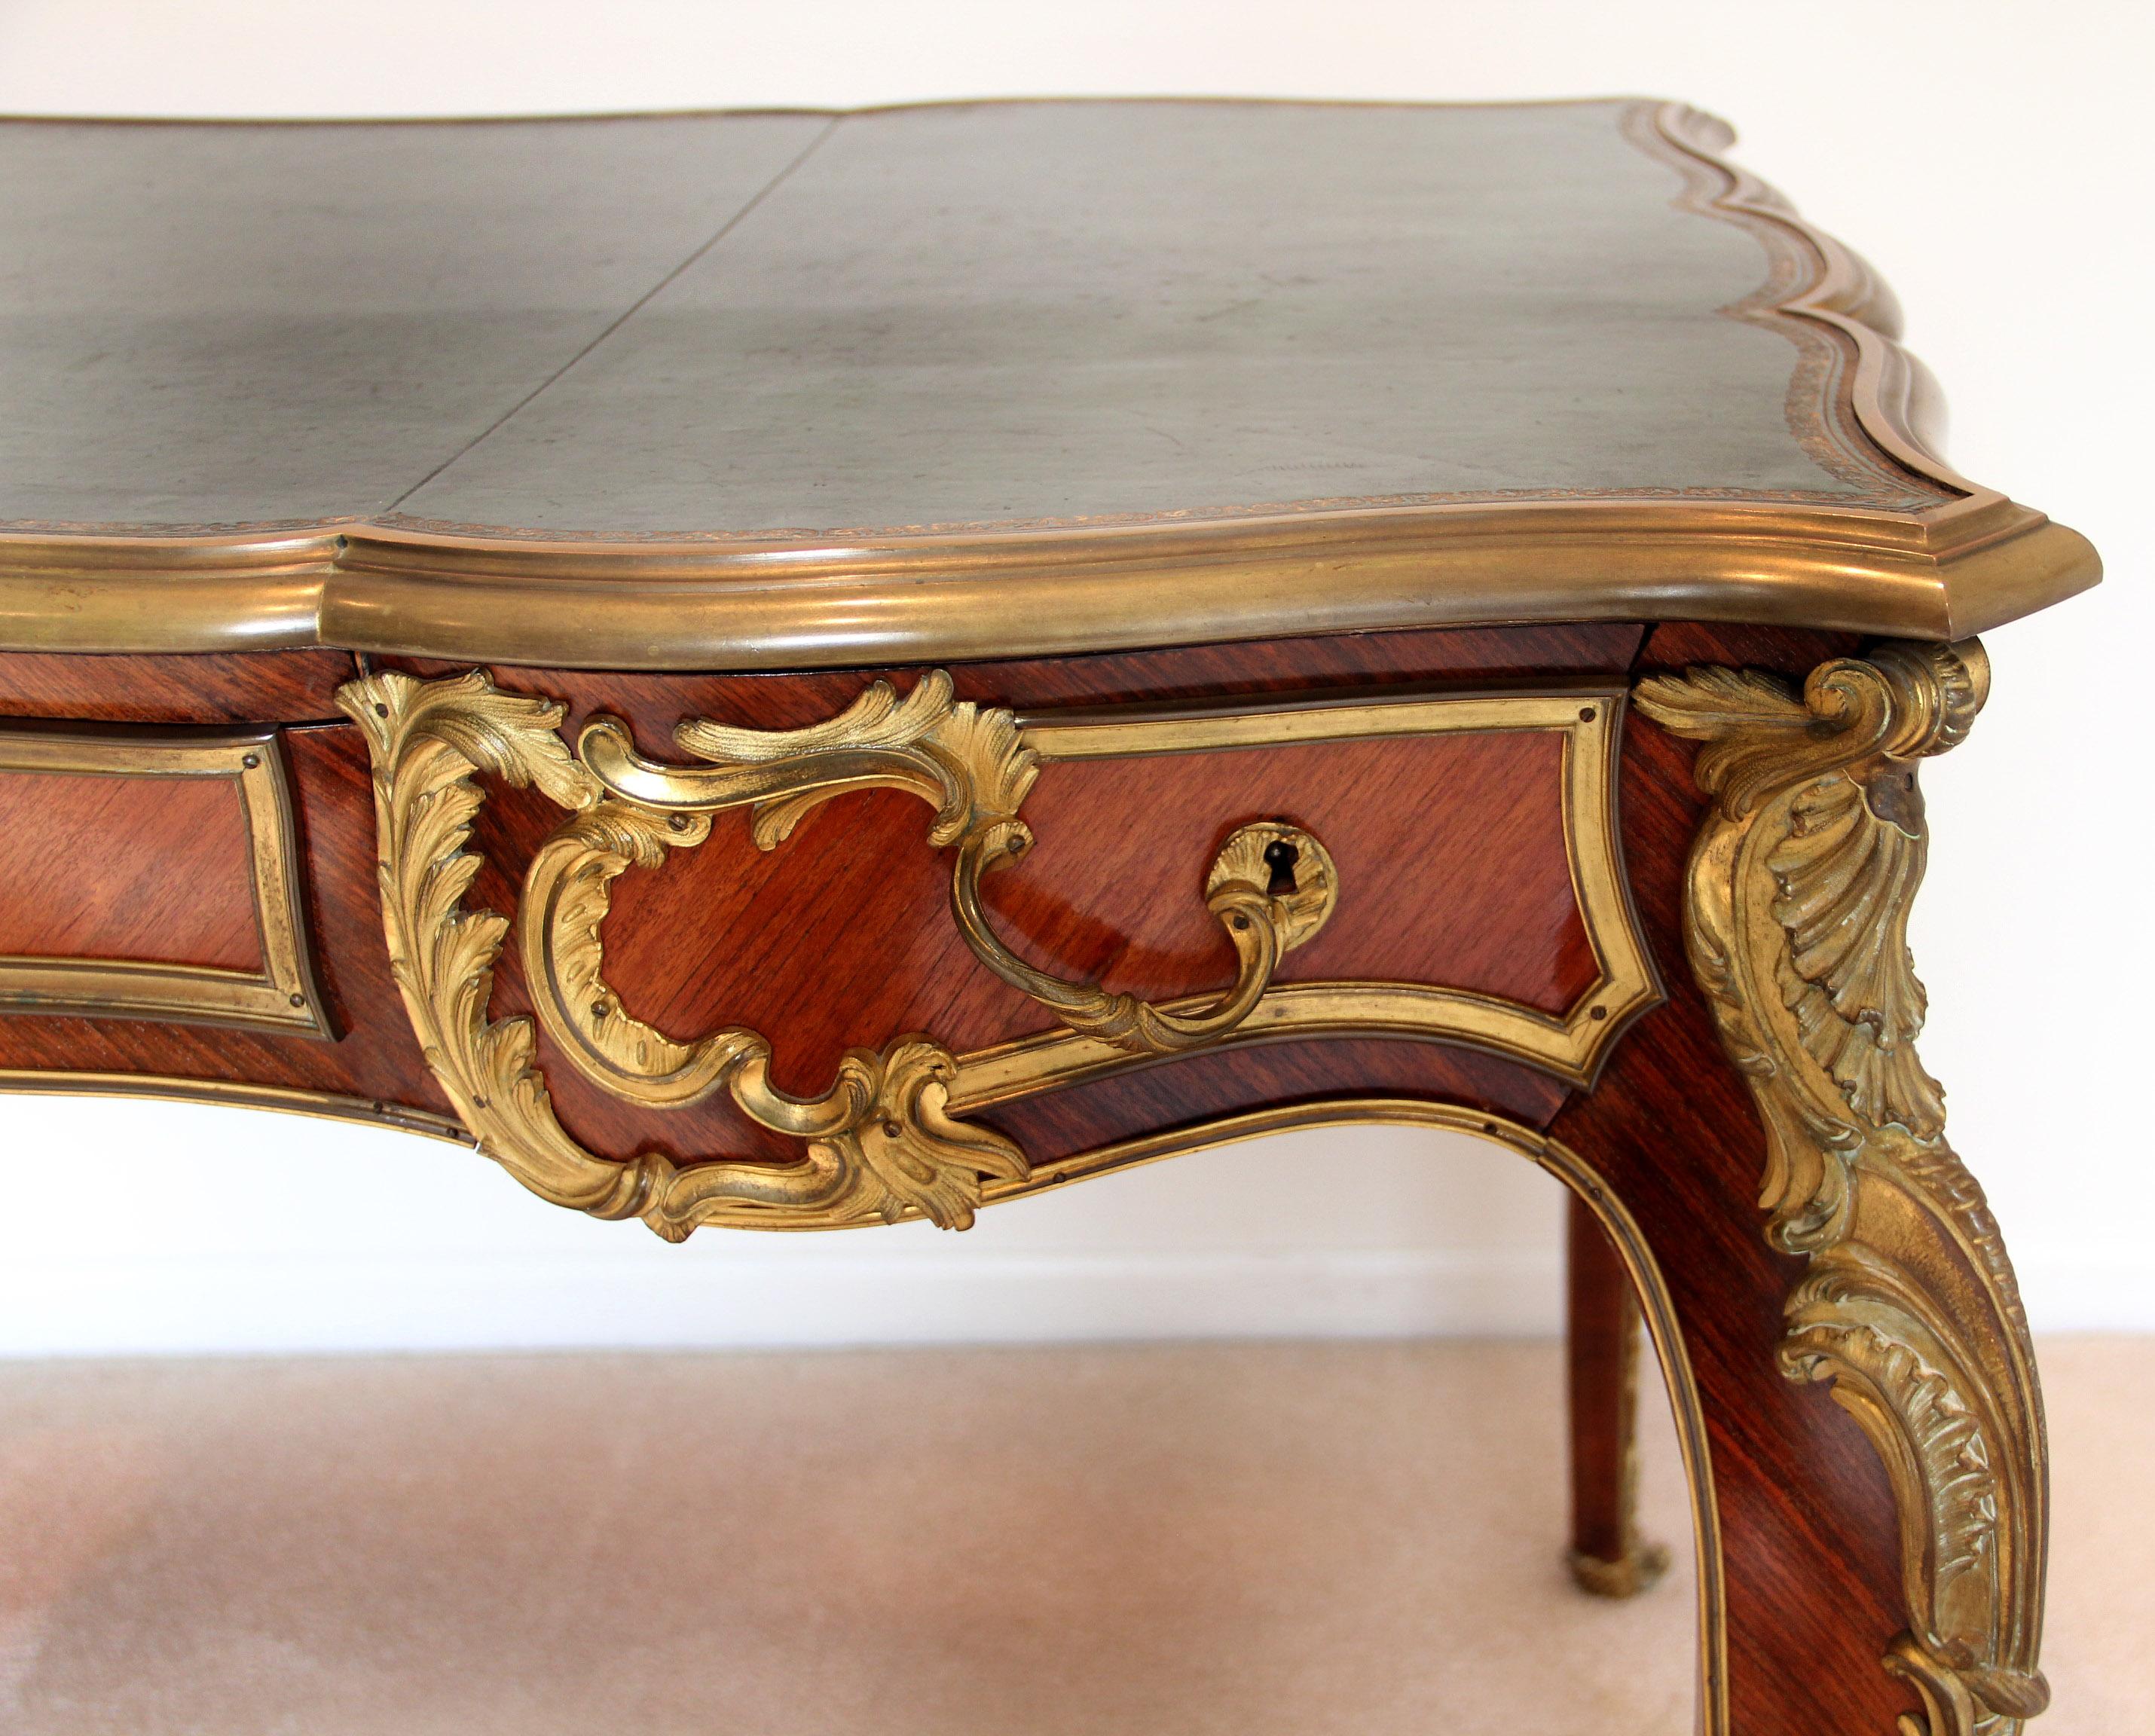 A nice late 19th century Louis XV style gilt bronze mounted bureau plat

The rectangular top with gilt-tooled leather writing-surface within a molded border, above a quarter-veneered serpentine frieze, three drawers to the front and three